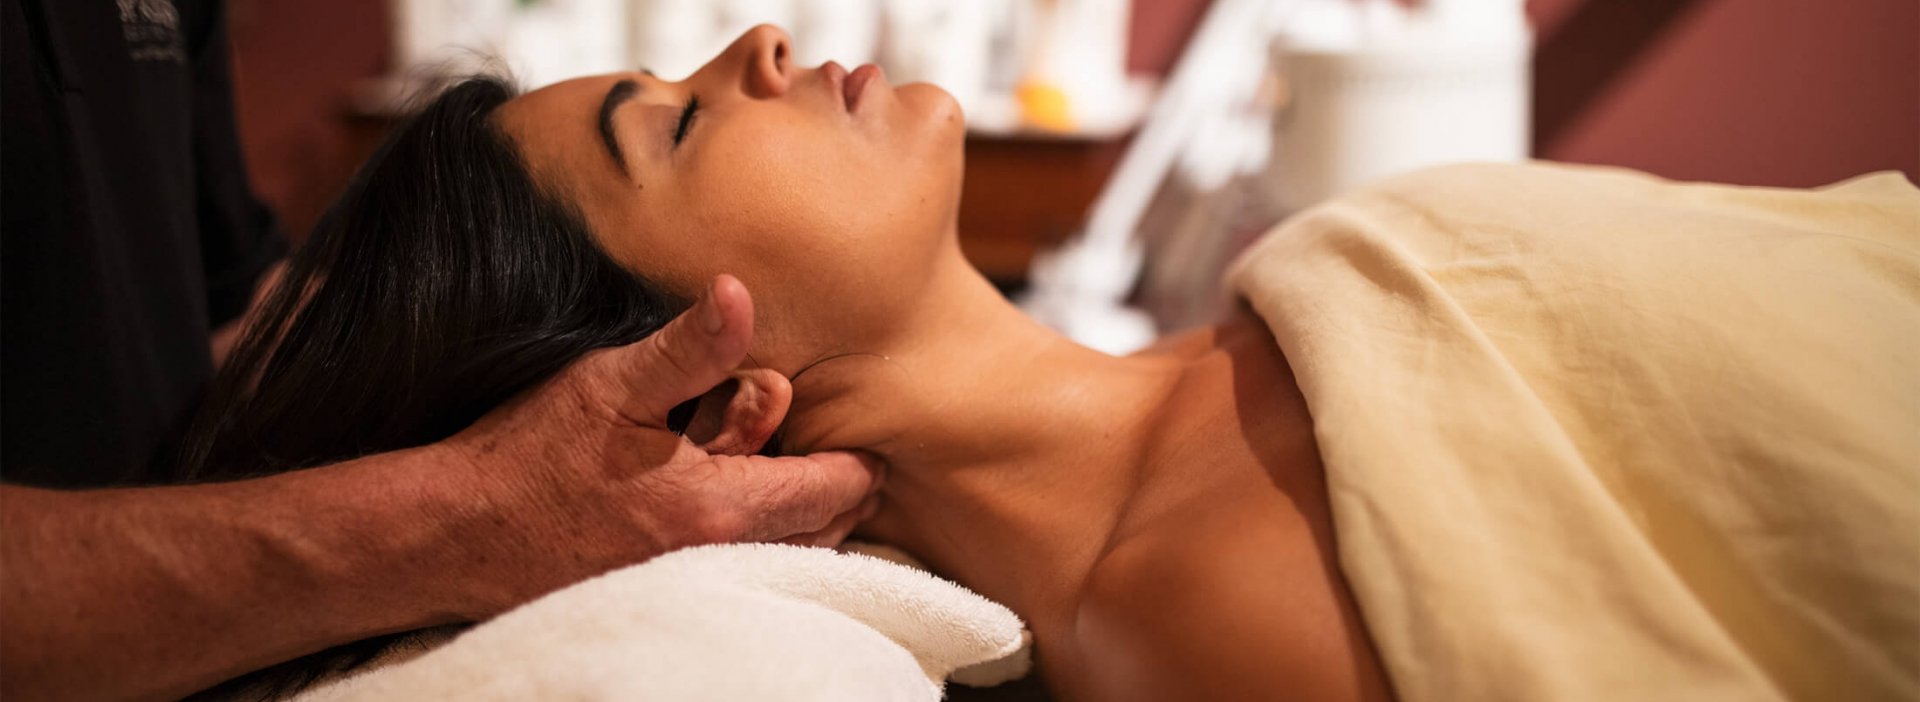 Why go to a Spa? To detoxify, moisturize and renew body, mind and spirit